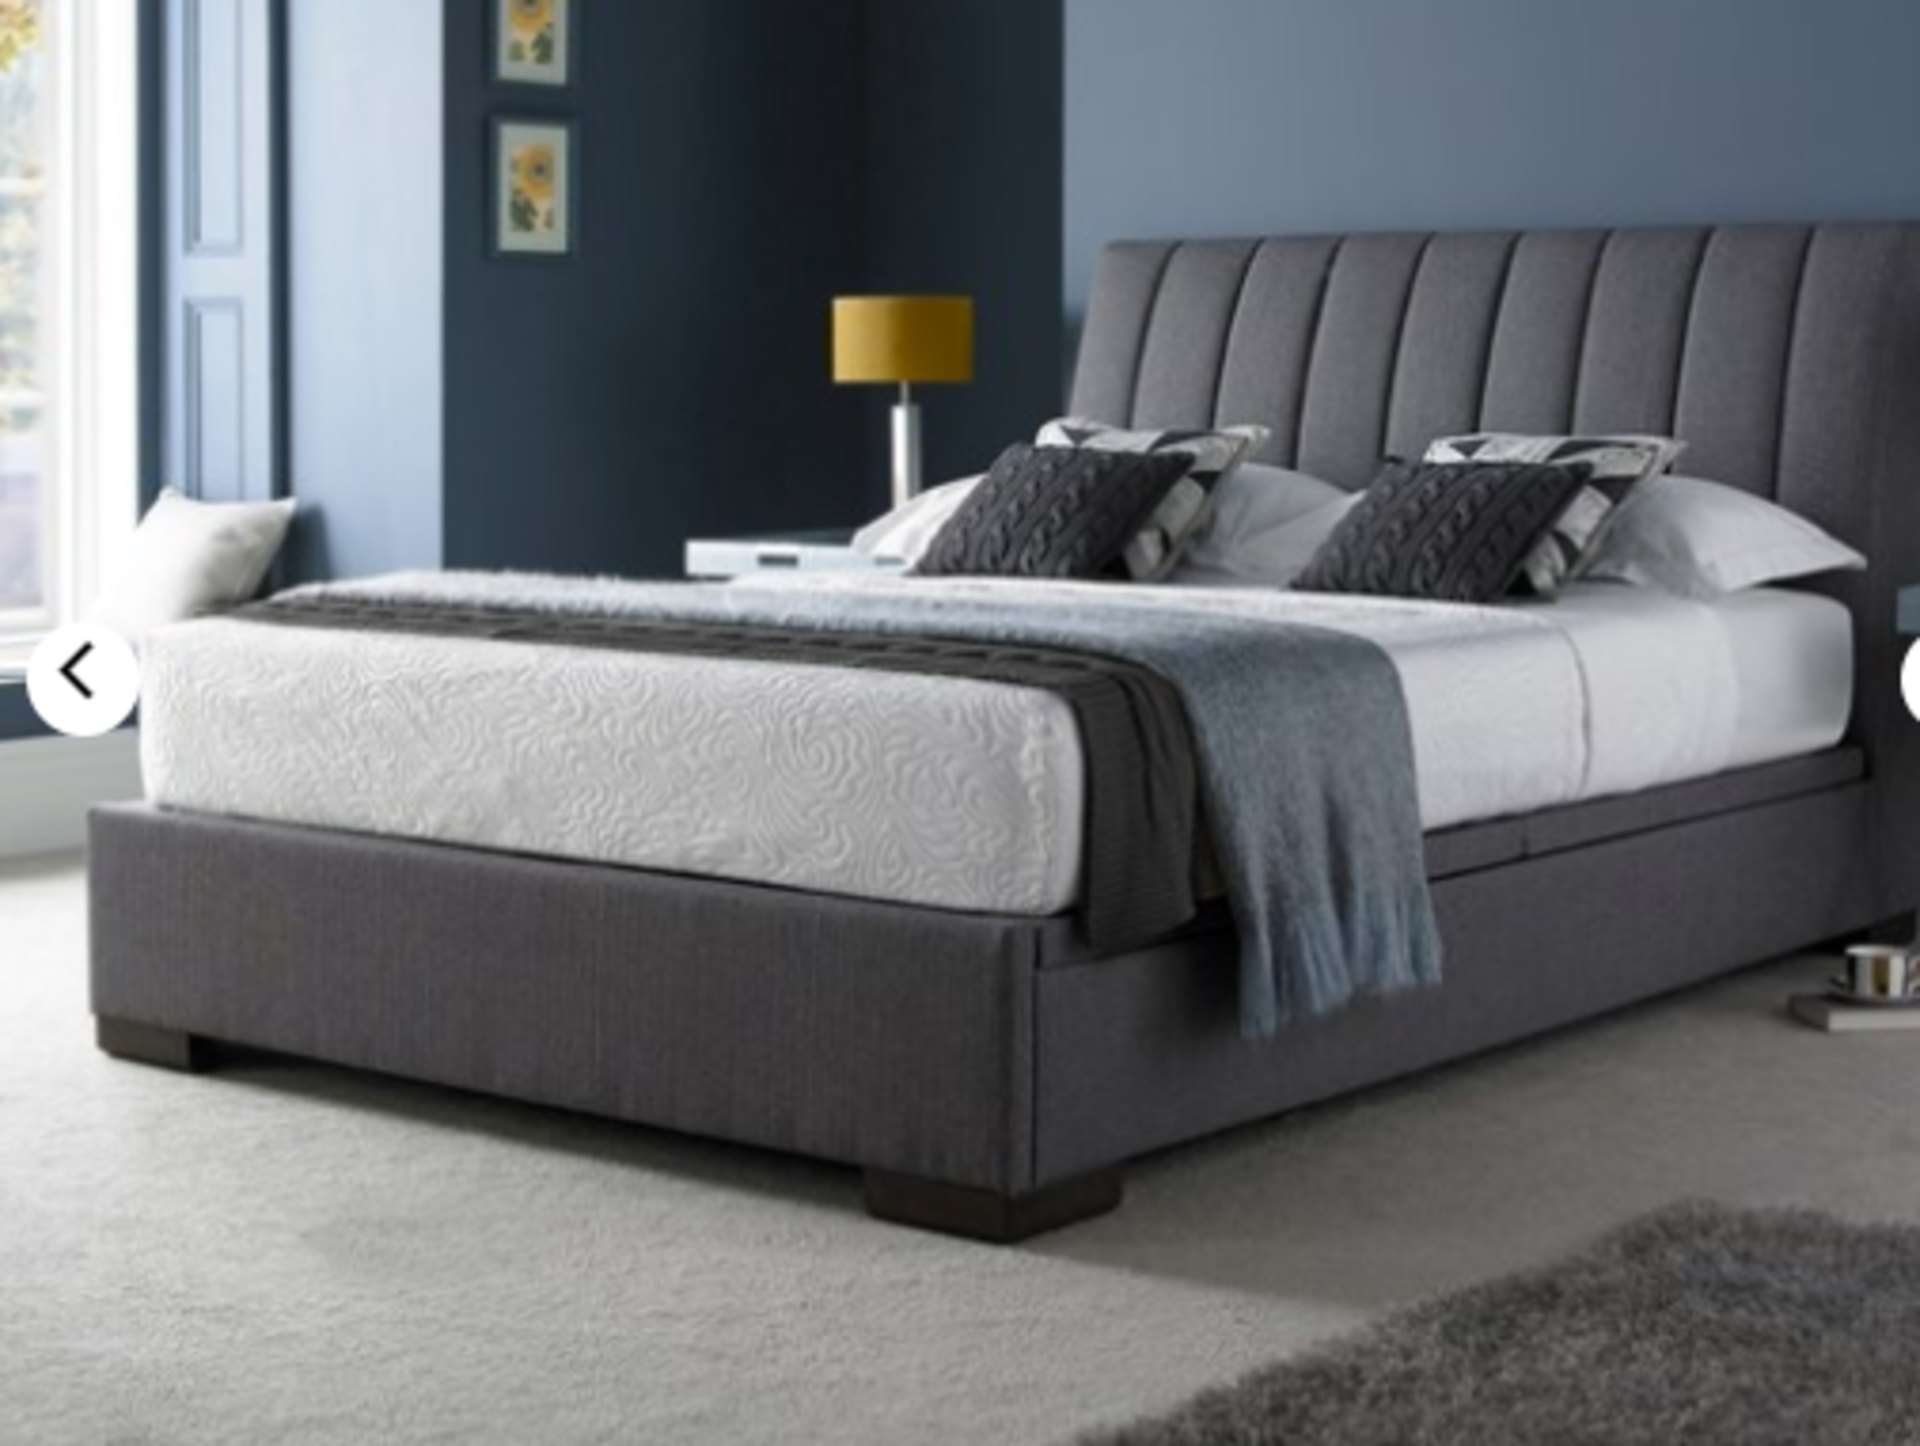 | 1X | LANA 4FT6 OTTOMAN BED FRAME GREY | UNCHECKED & BOXED | 2 BOXES | RRP £699 |